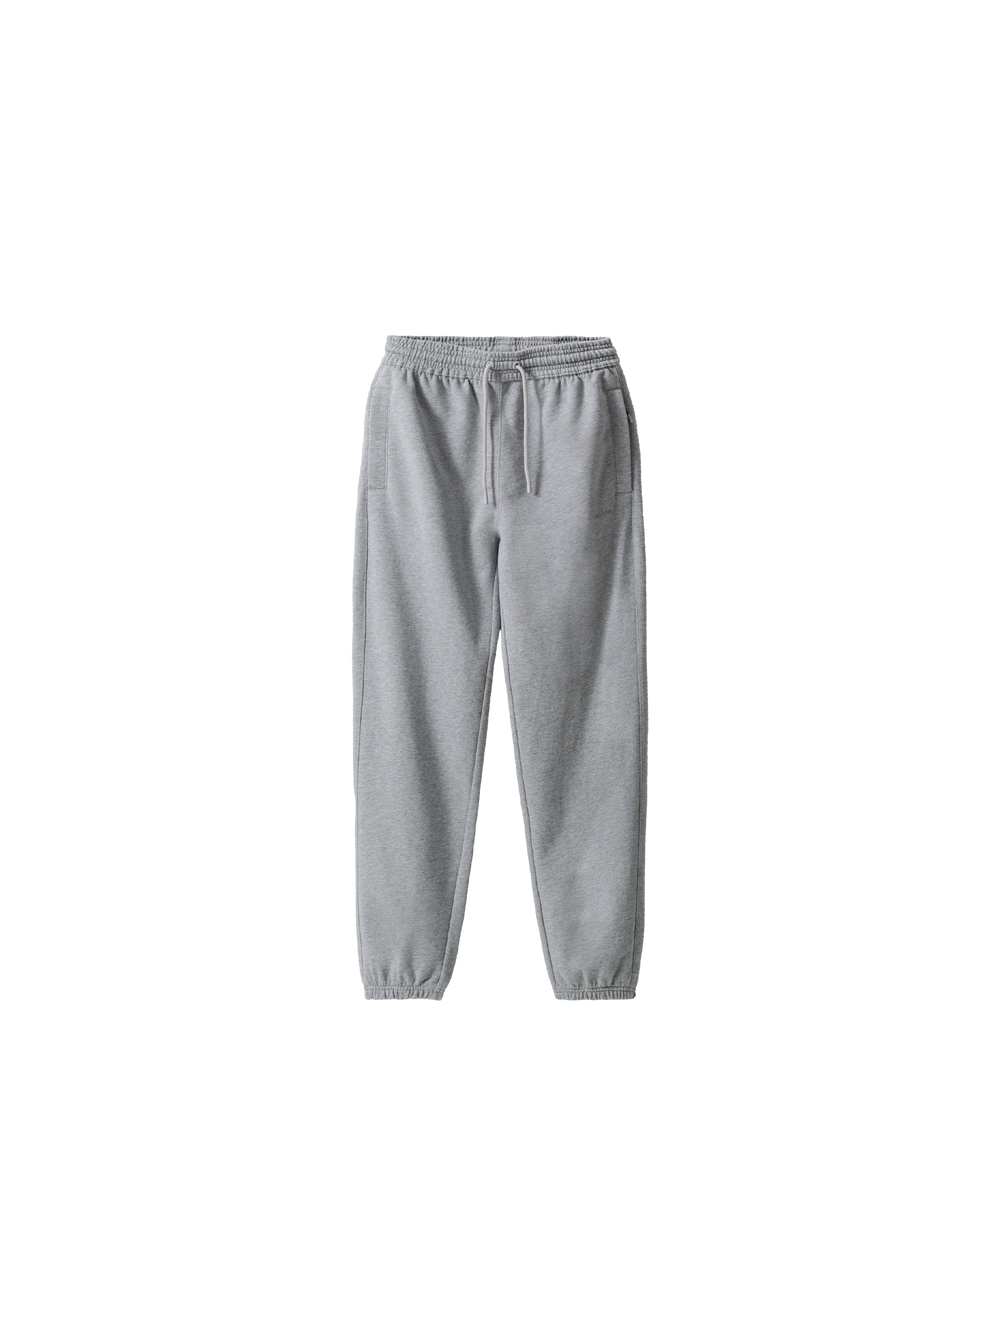 Product Image for Women's Essentials Sweatpant